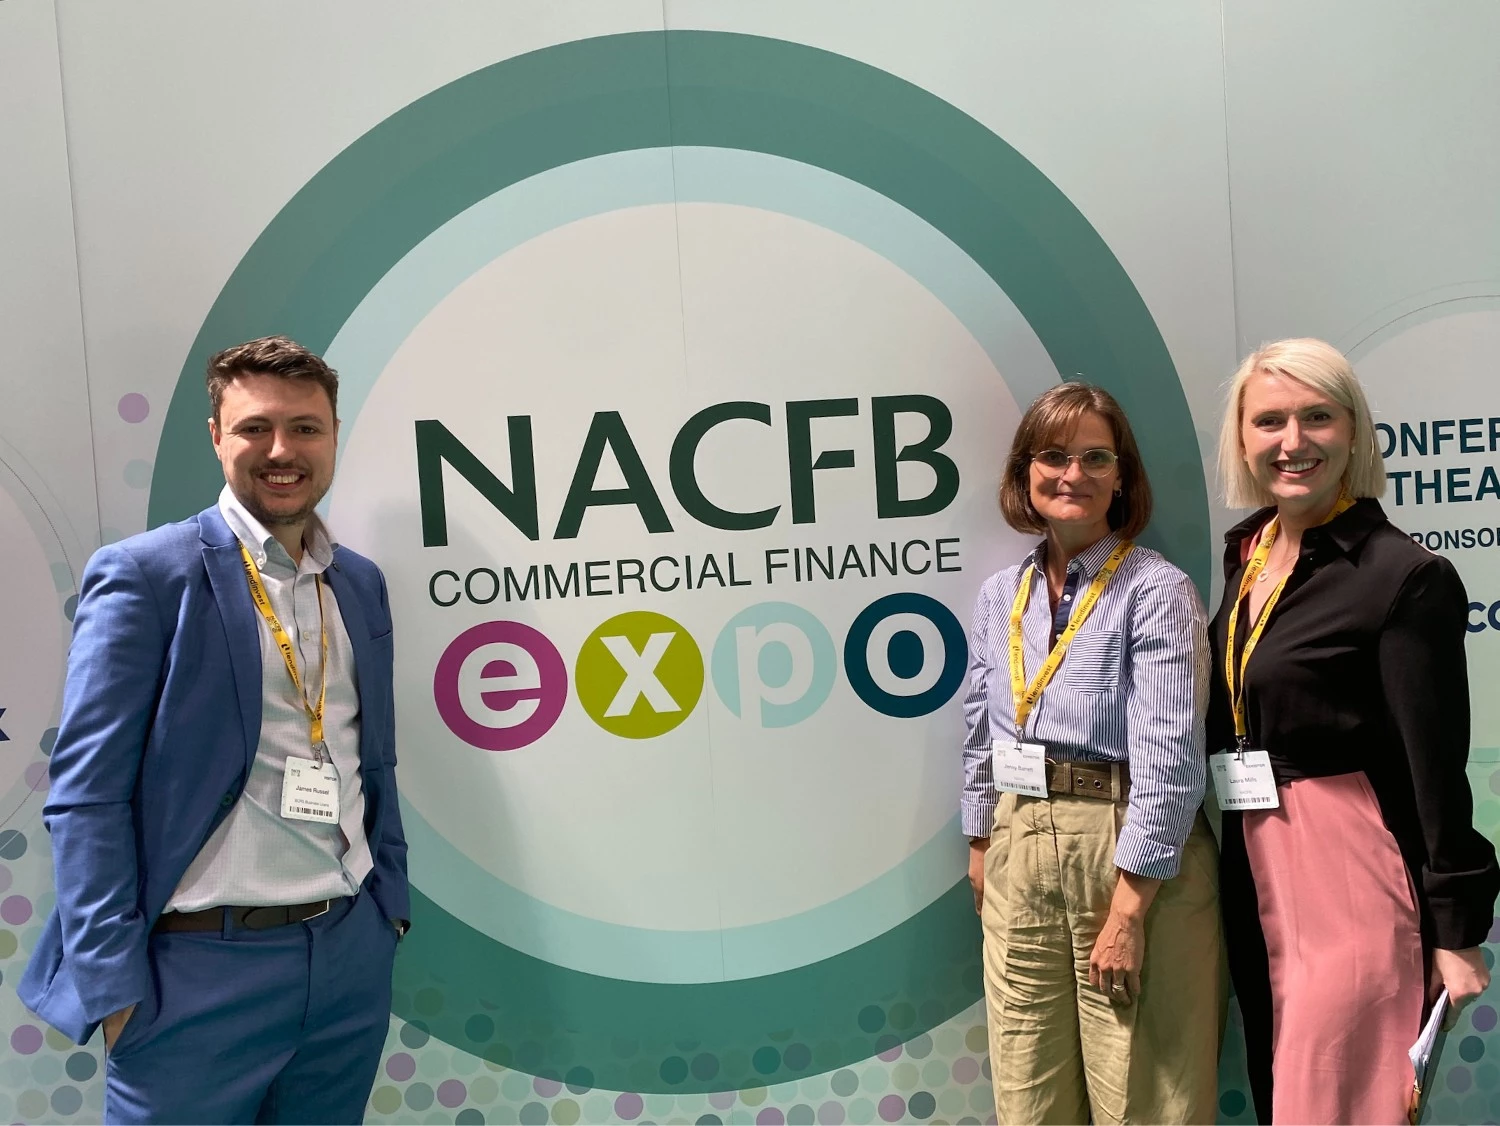 From left, James Russell from BCRS with Jenny Barrett and Laura Mills of NACFB